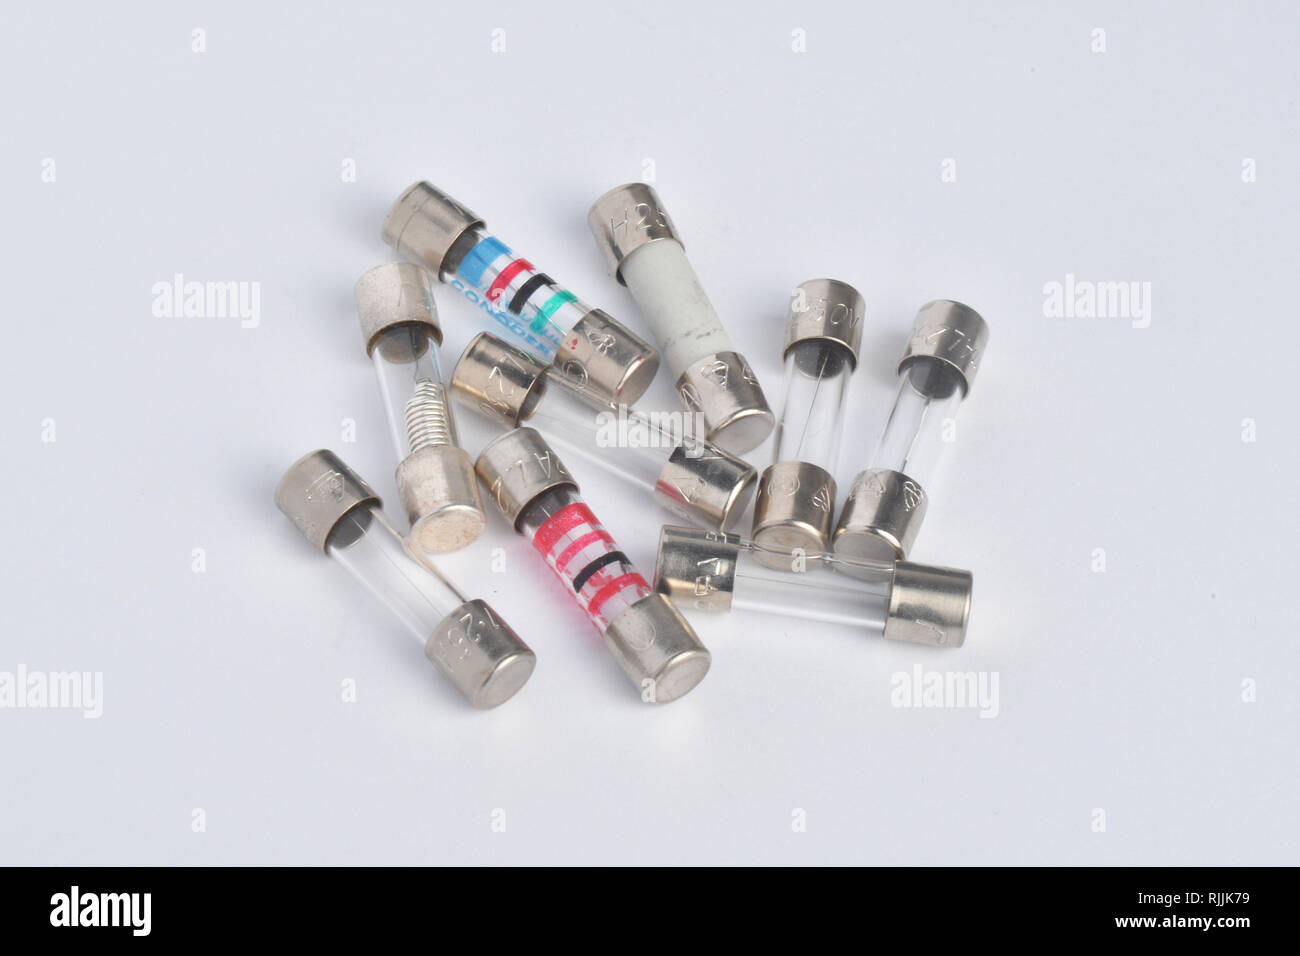 Fuses.A selection of 20 x 5mm fuses both Glass bodied and Ceramic bodied, fast acting and slow blow (Time delay).For use in a multitude of application Stock Photo